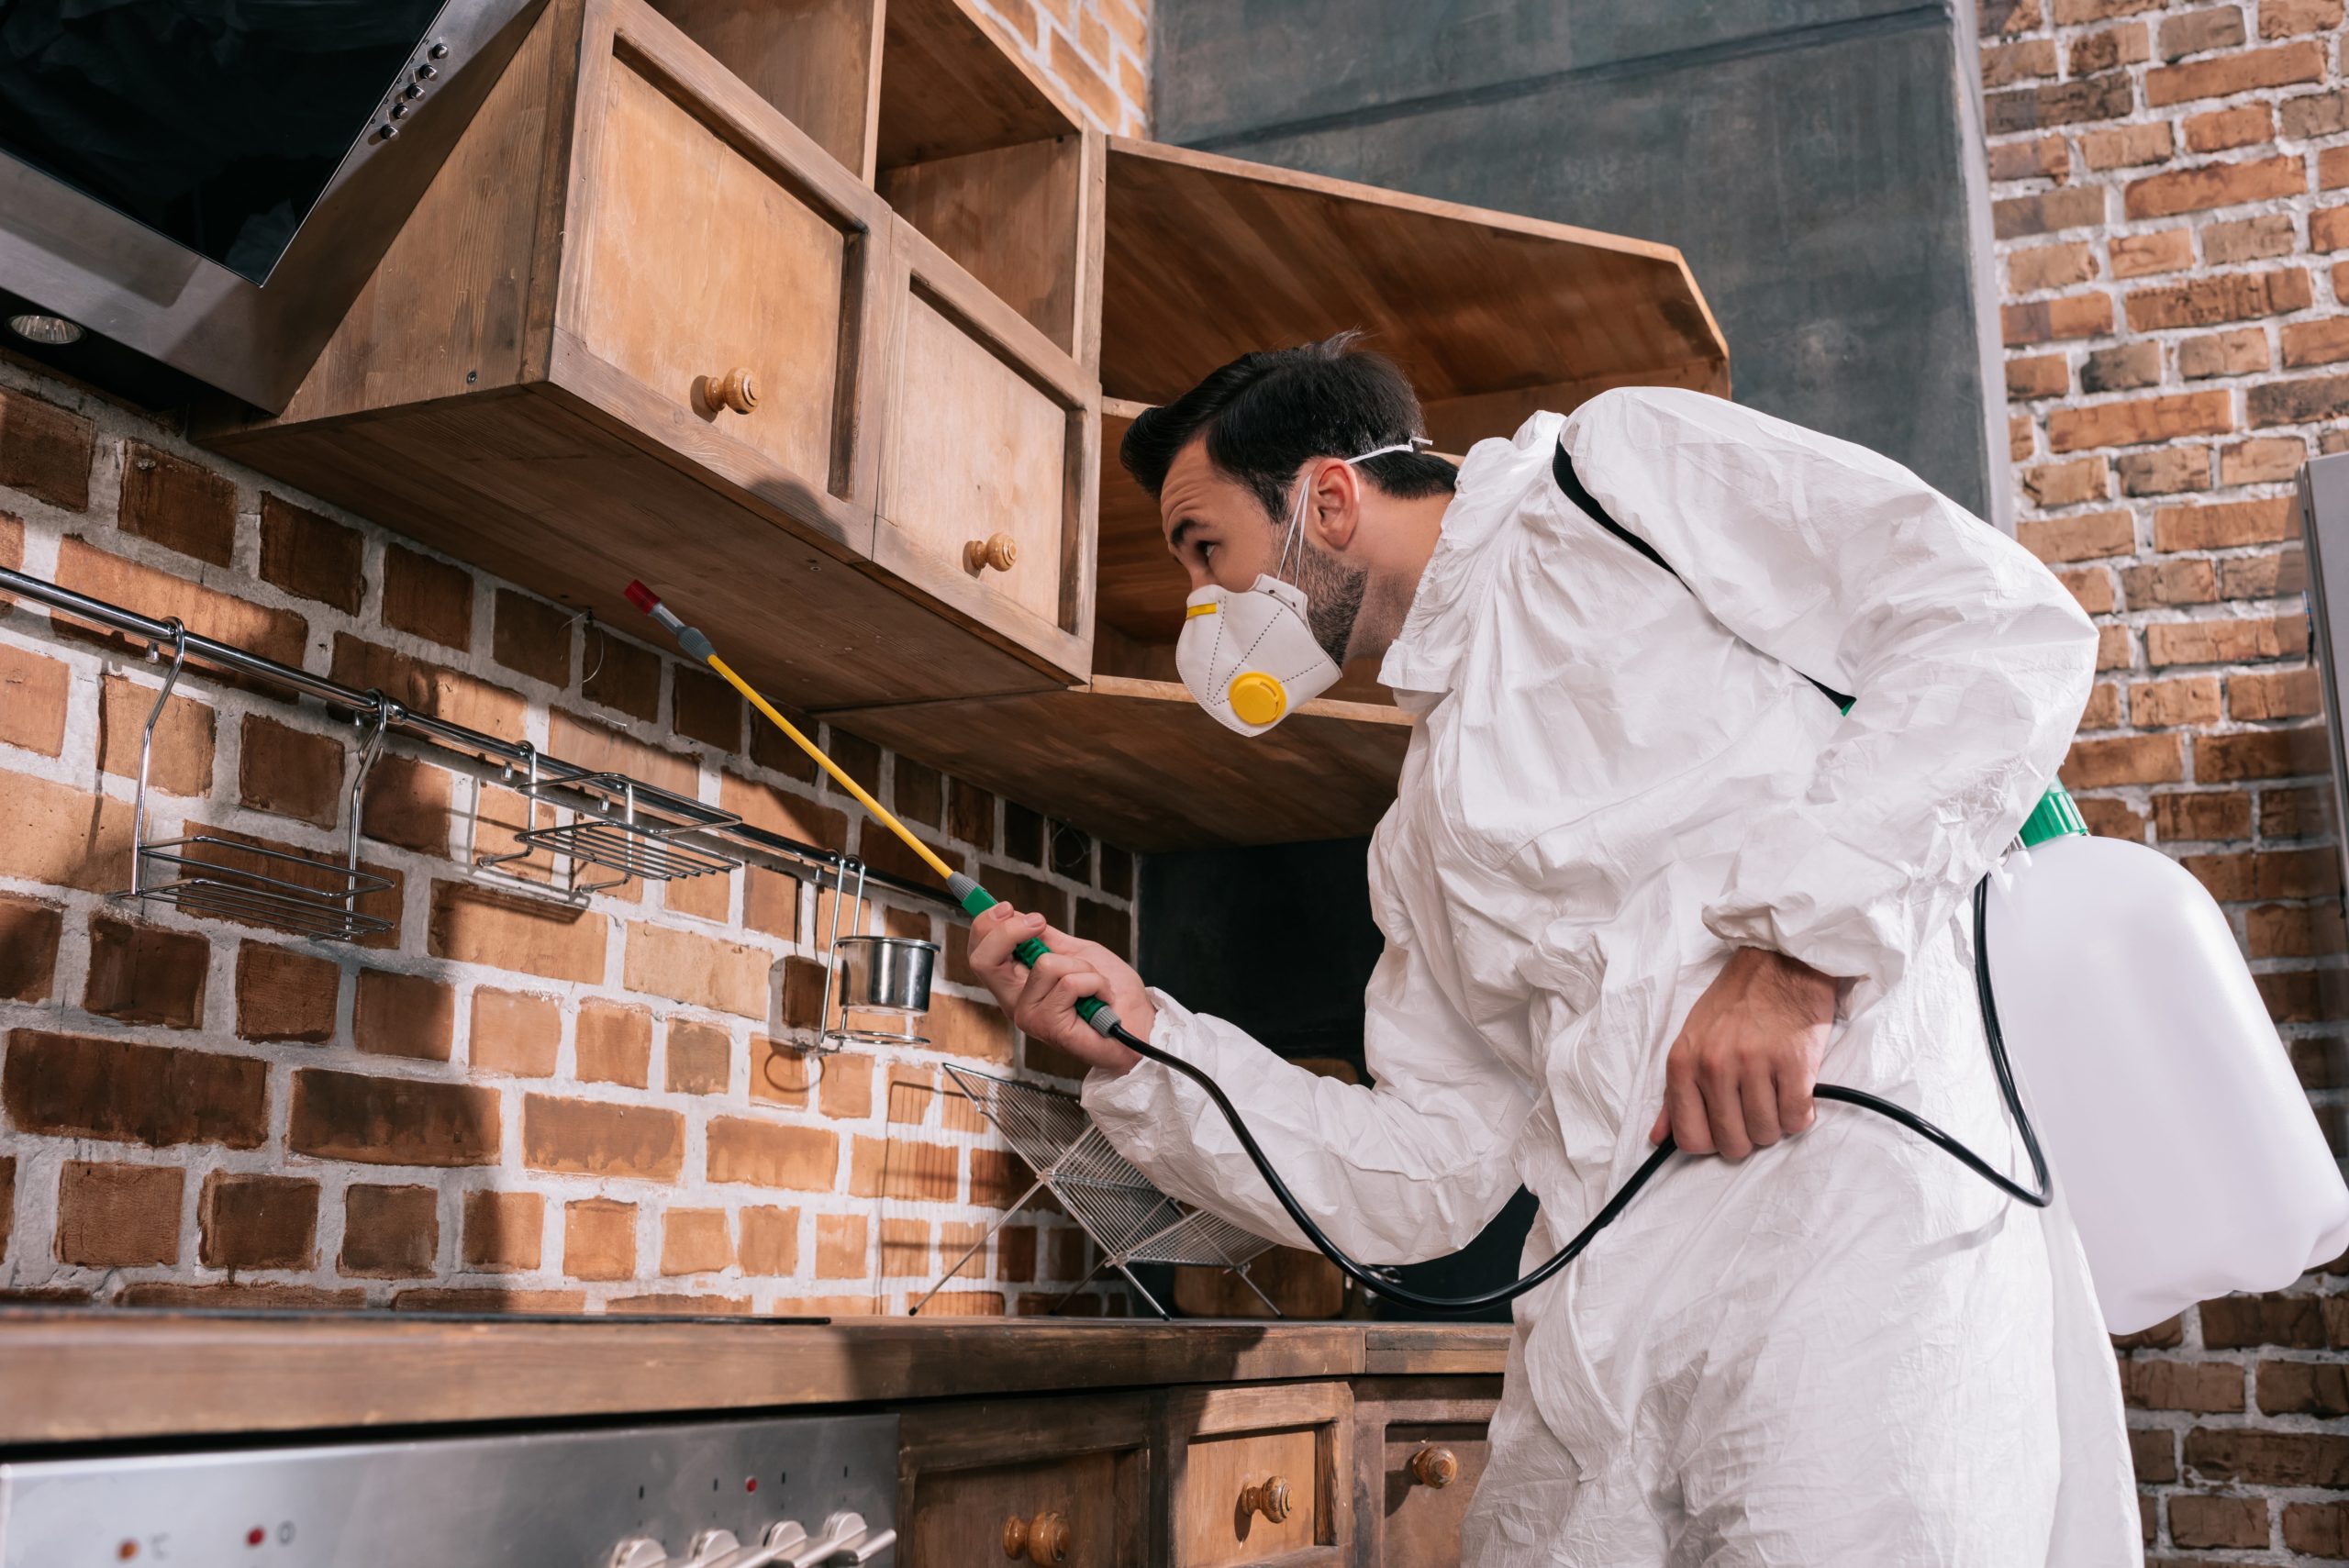 a man wearing a white suit and mask spraying a kitchen